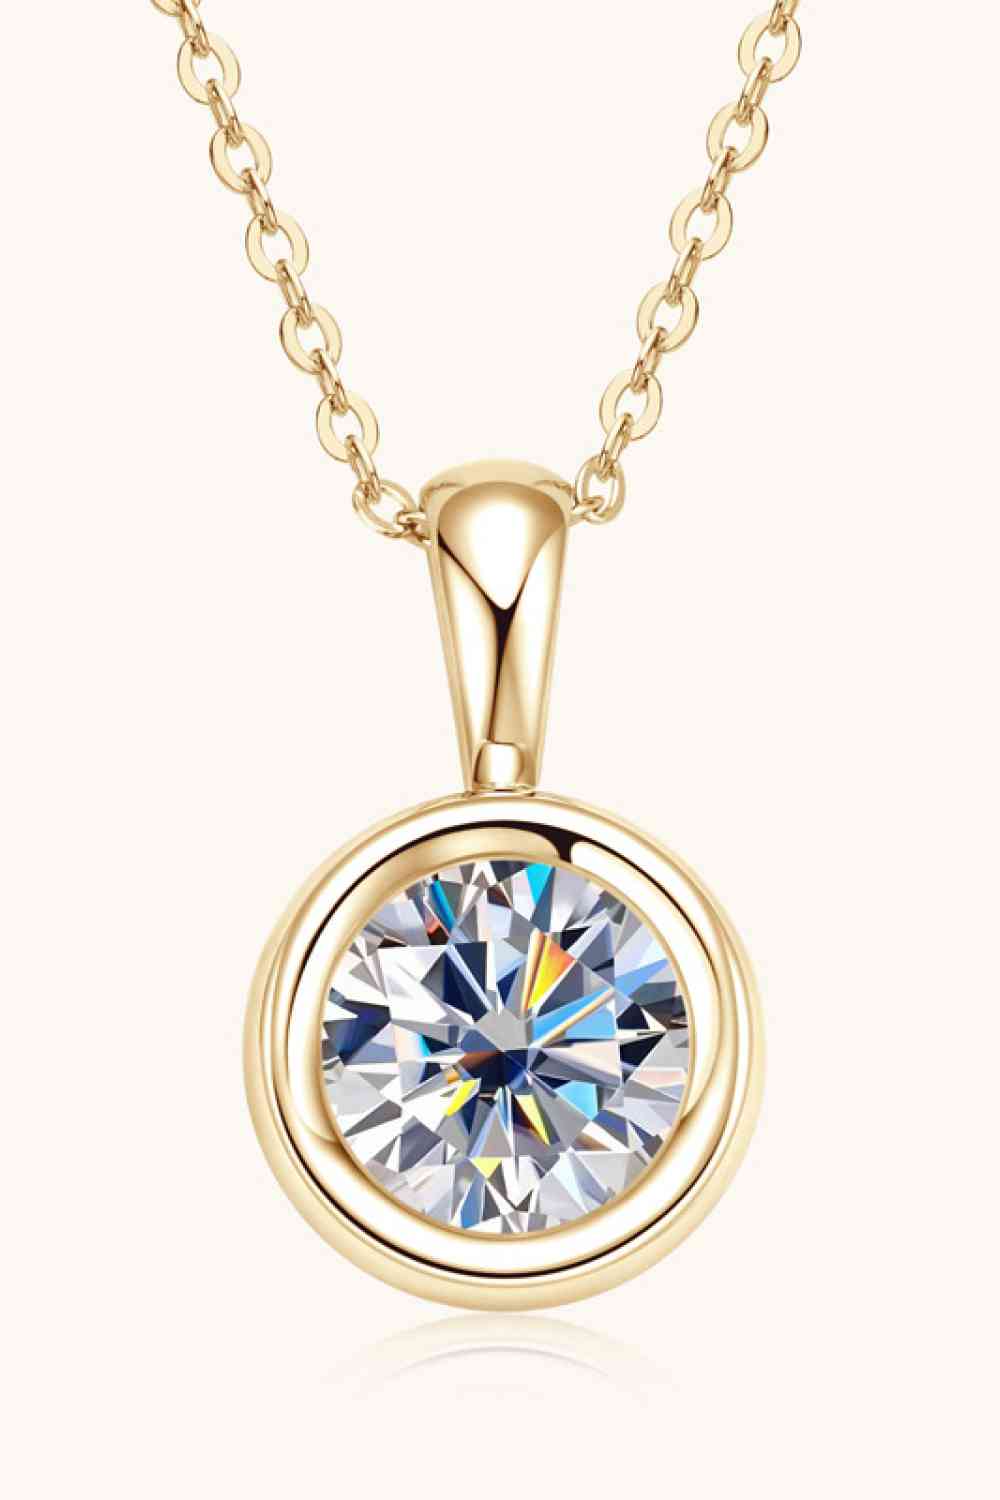 Rondell Pendant Moissanite 925 Sterling Silver Necklace (2 ct. t.w.)